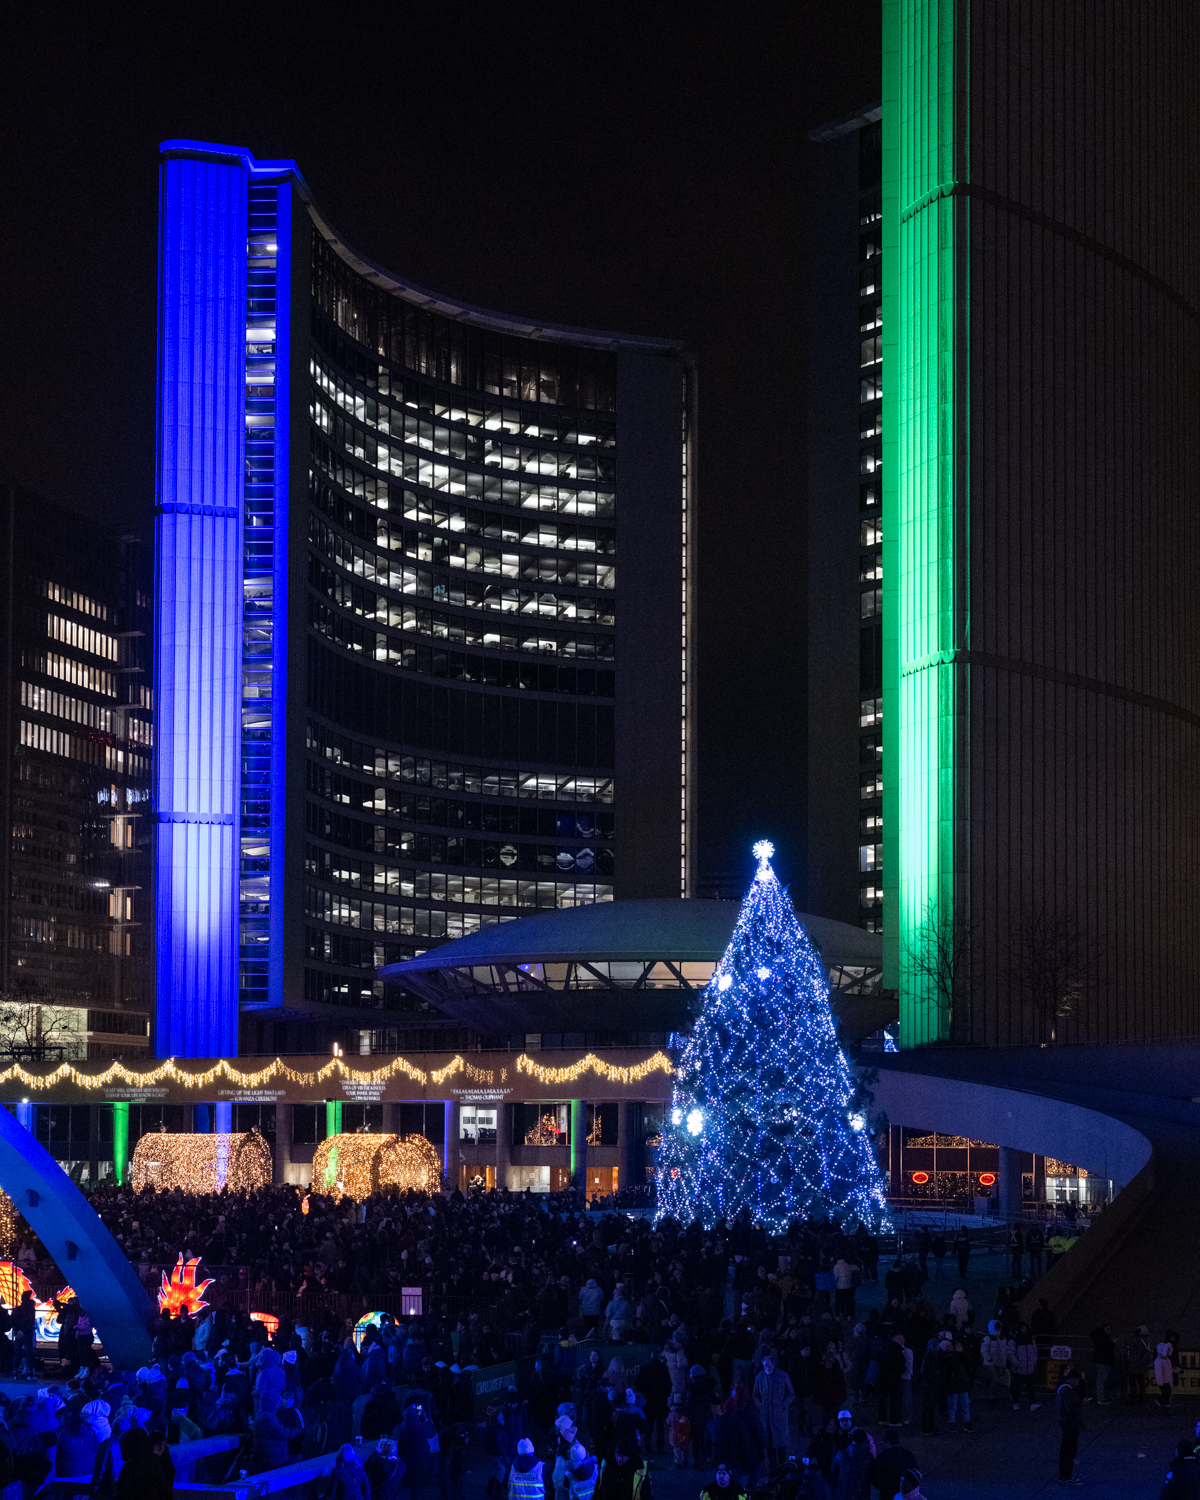 Toronto City Hall lit up blue and green at night with a giant glowing Christmas tree in front.